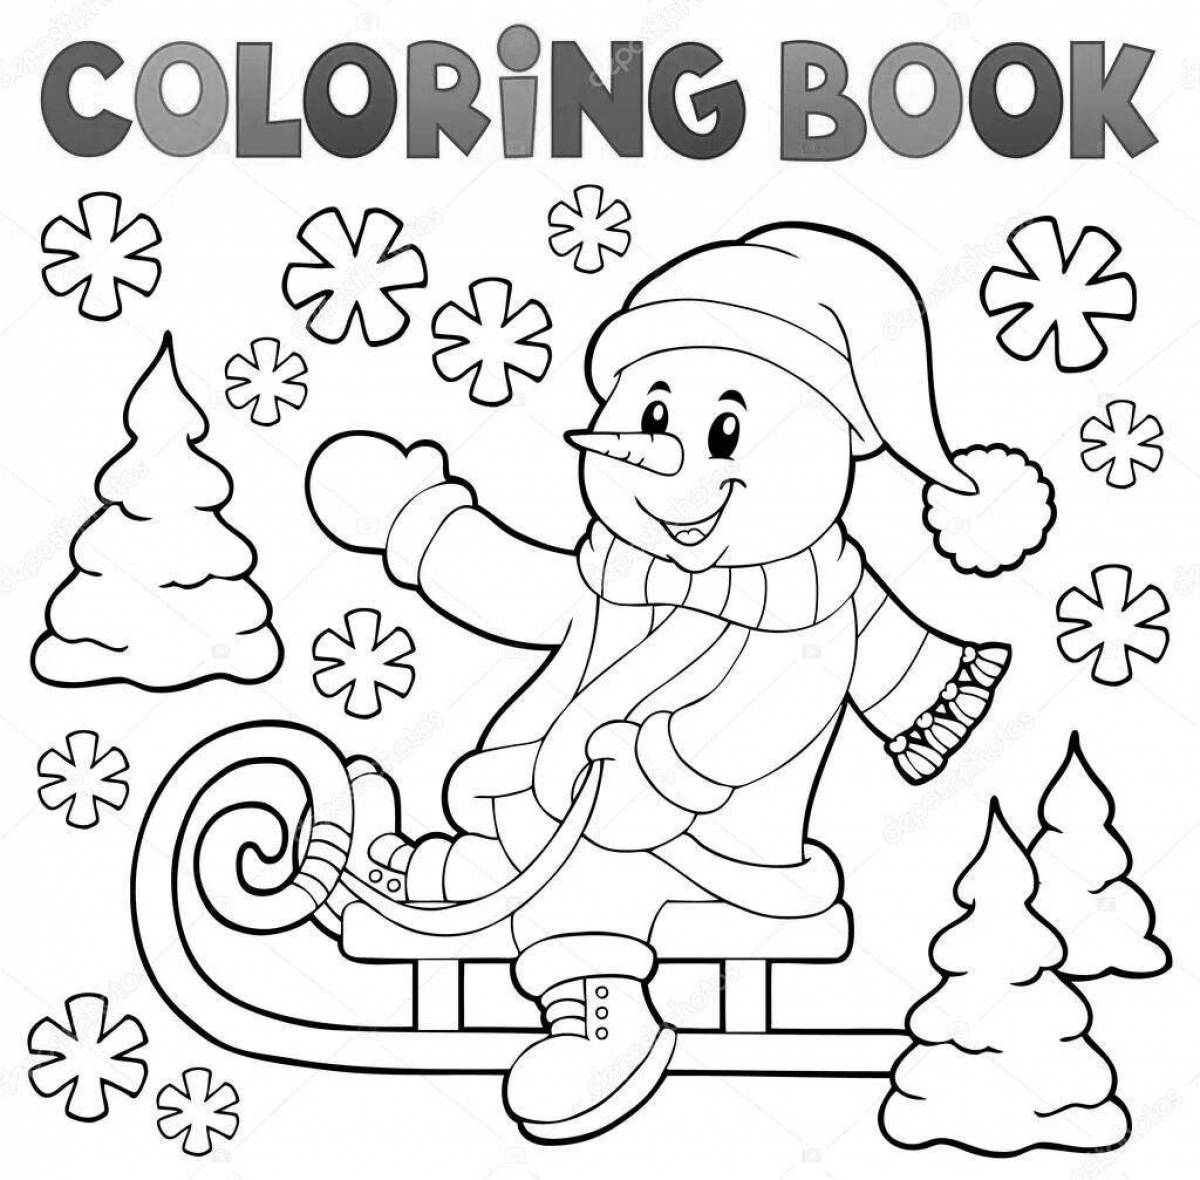 Coloring page of a cheerful snowman on a sled